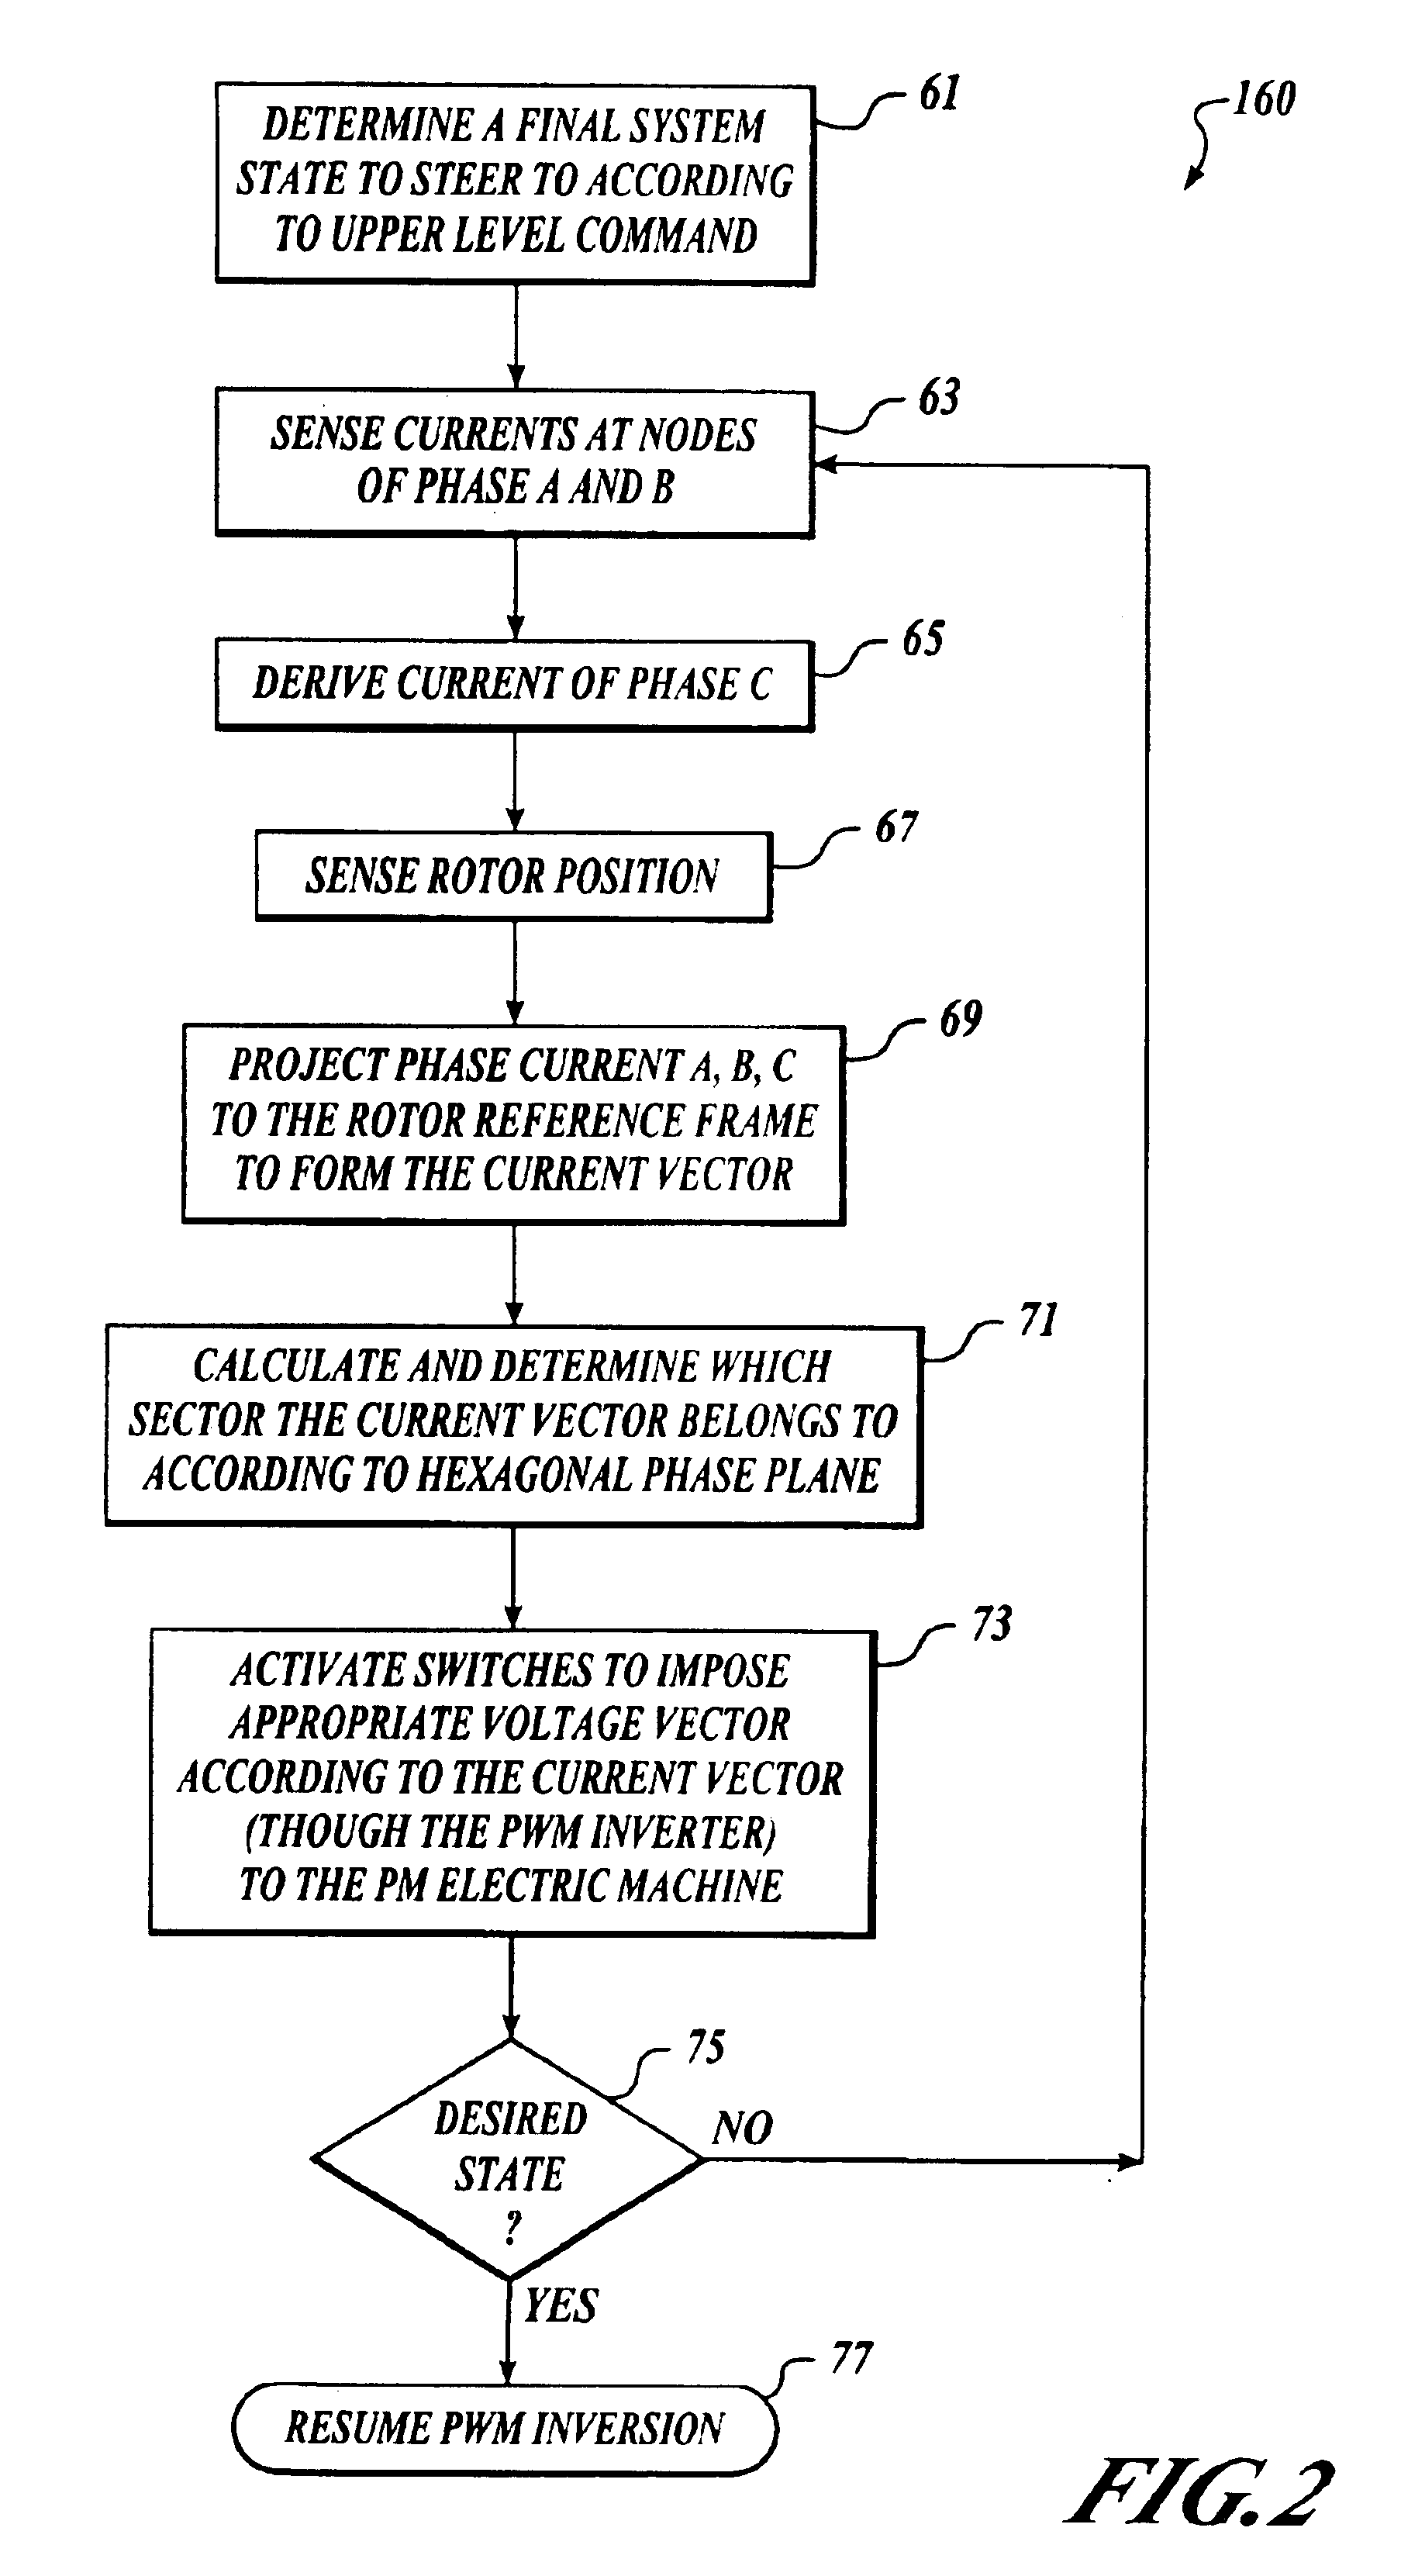 Control method for peak power delivery with limited DC-bus voltage